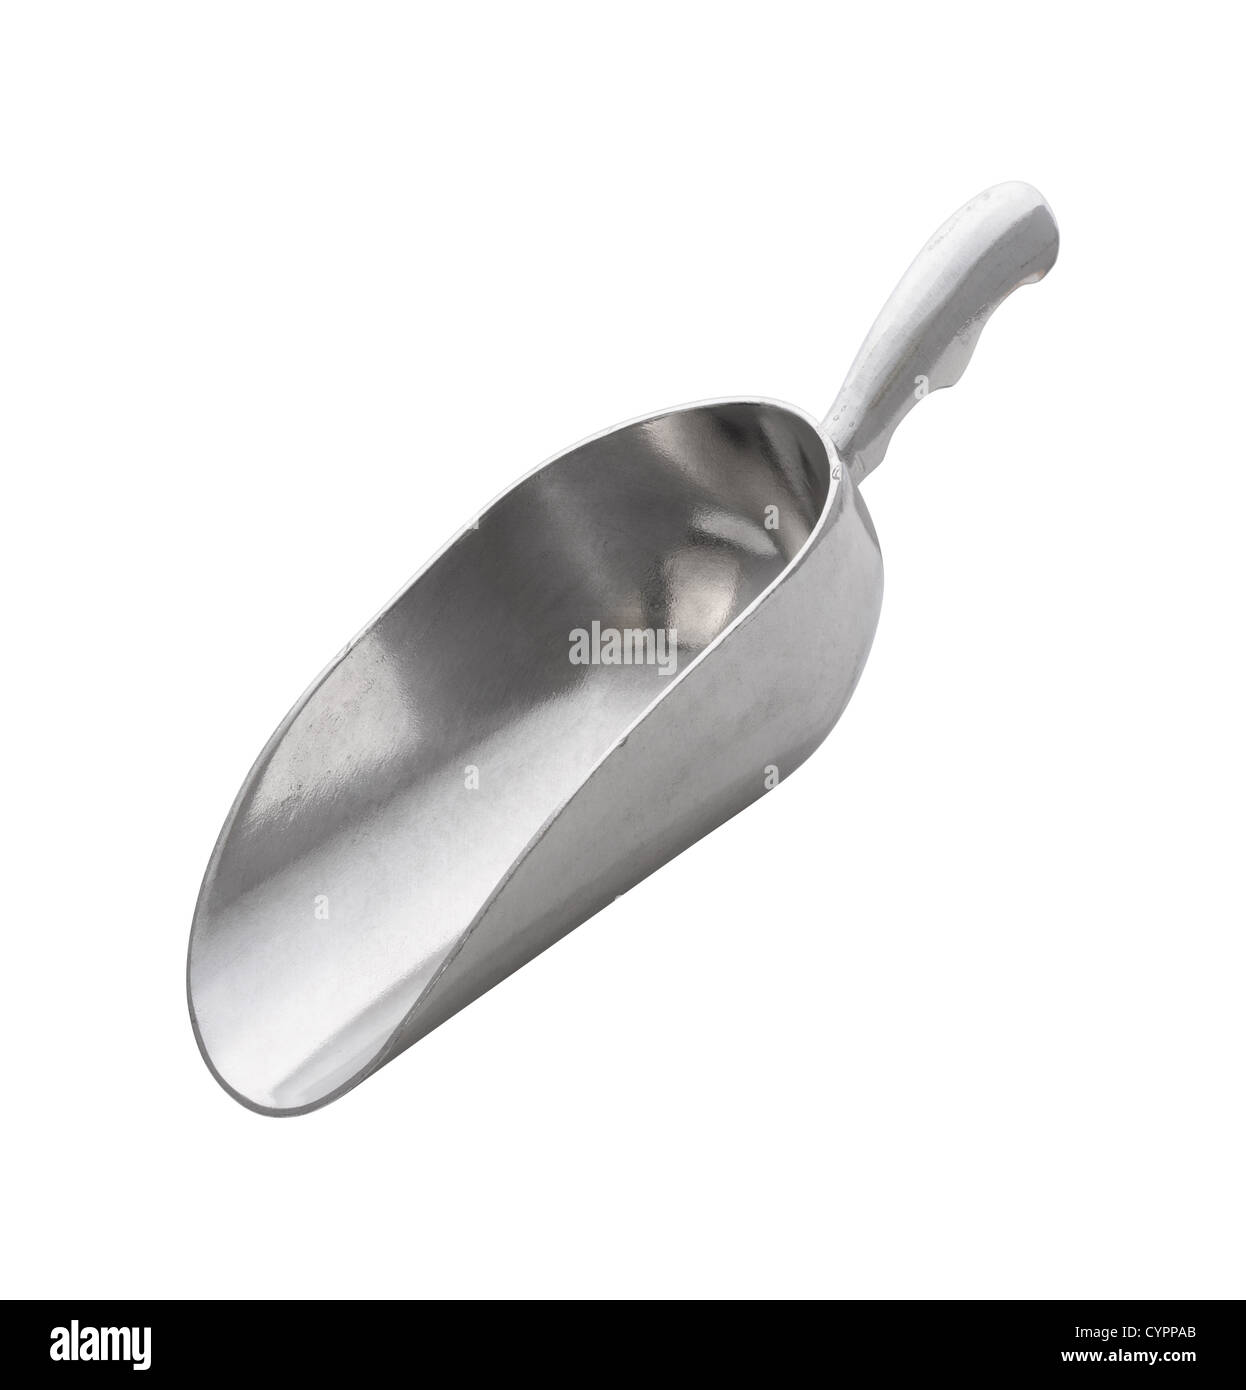 https://c8.alamy.com/comp/CYPPAB/stainless-metal-scoop-isolated-on-white-CYPPAB.jpg